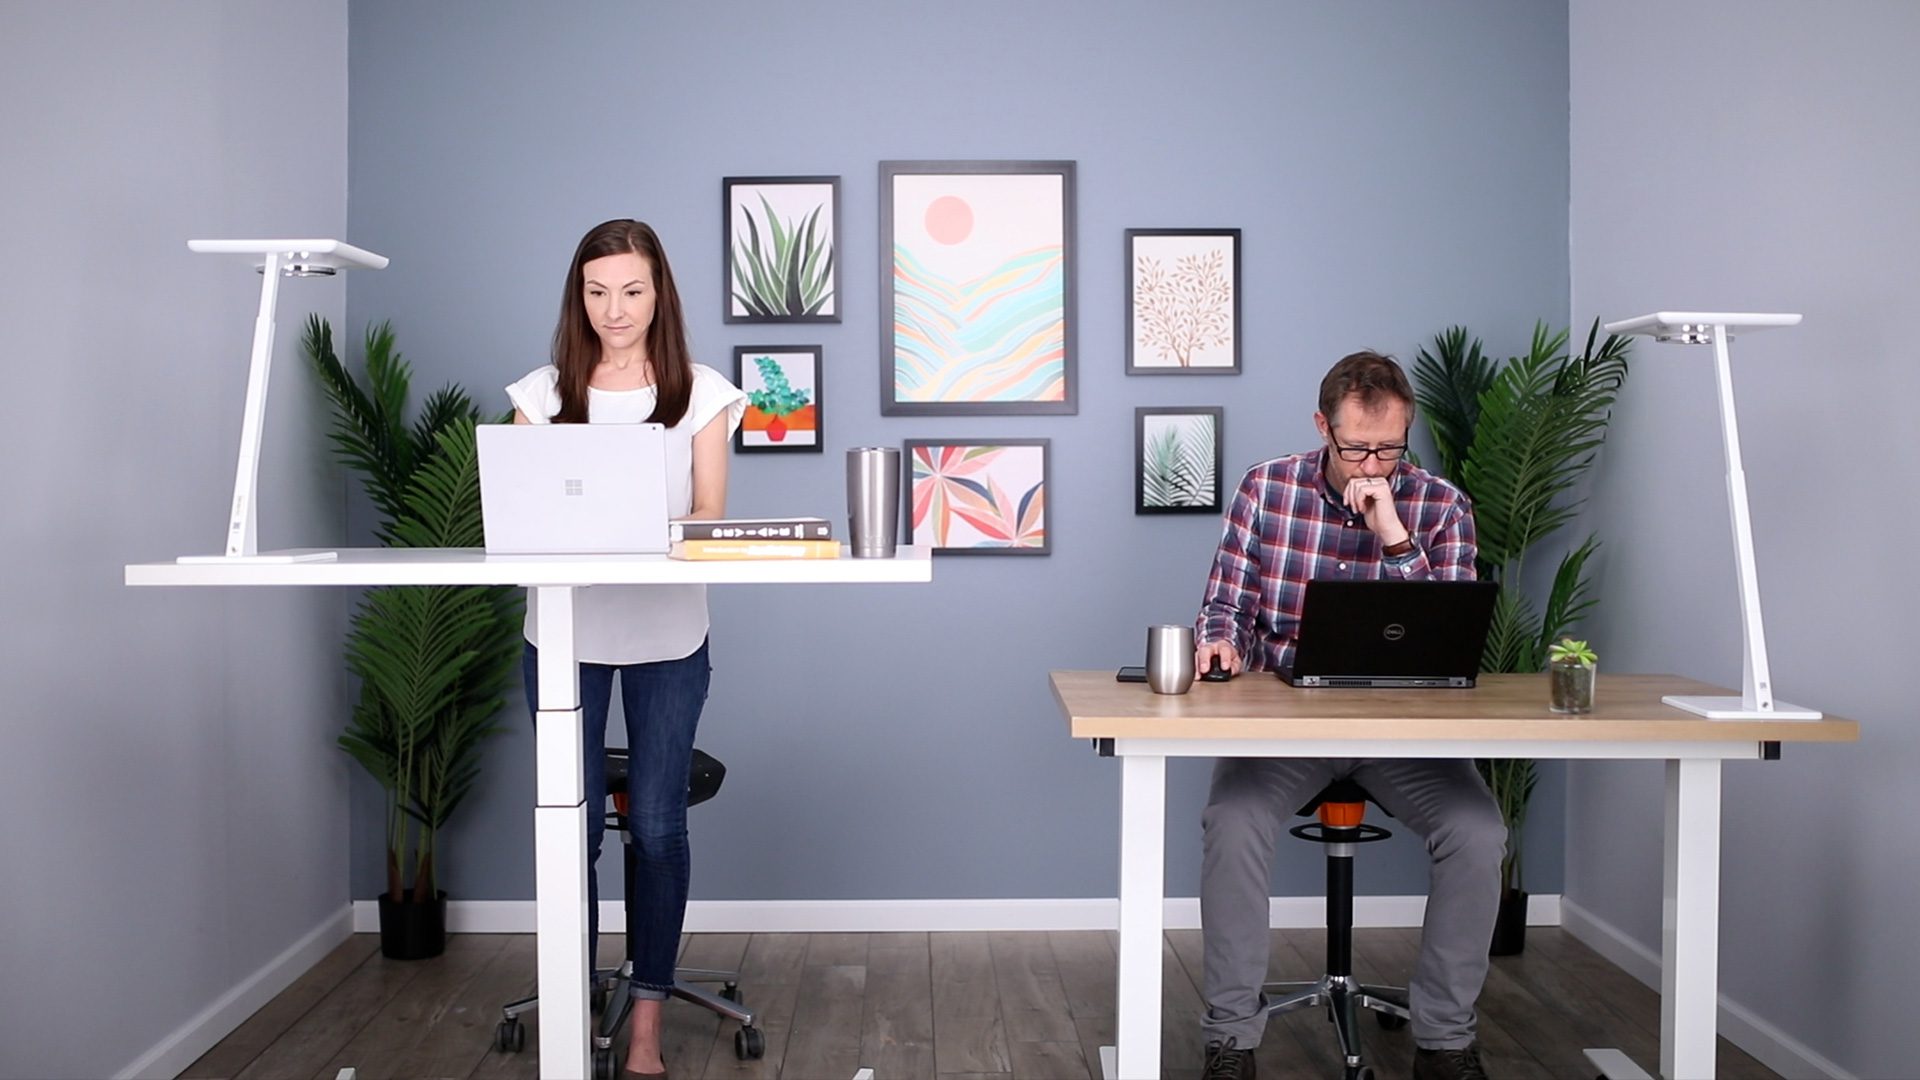 Hydraulic, Pneumatic, and Manual Standing Desks – What’s the Difference?